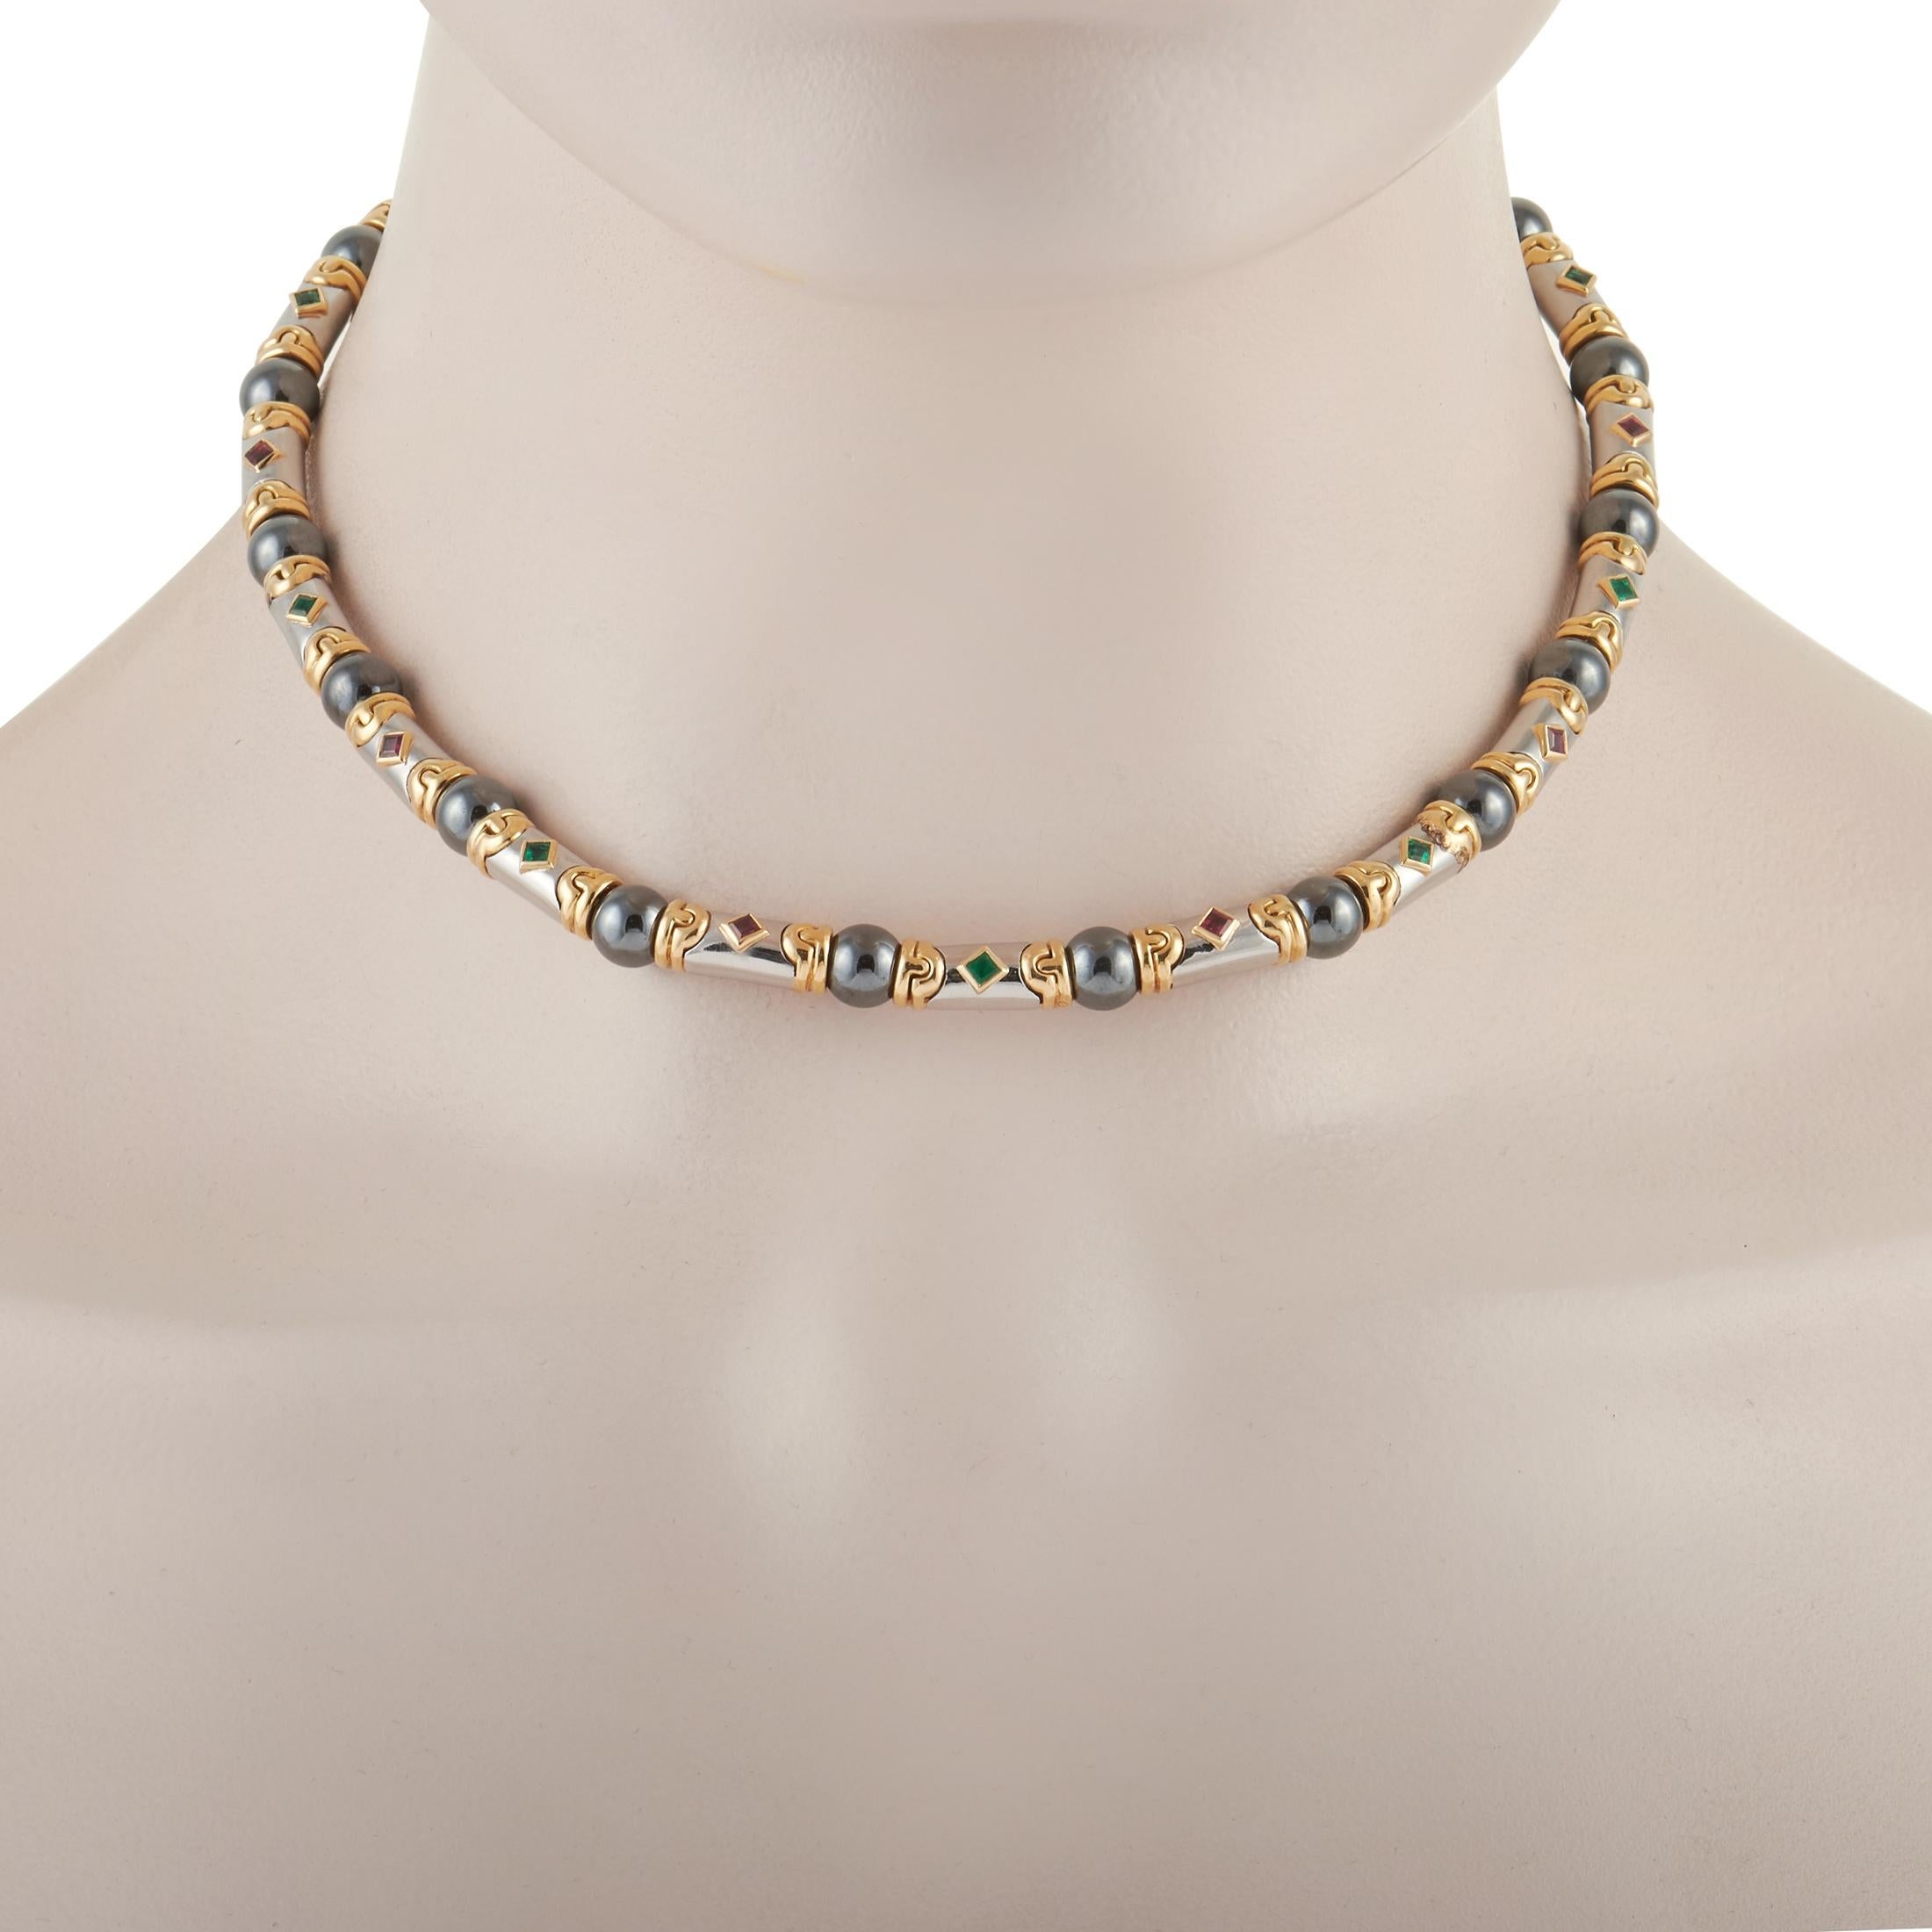 Mixed Cut Bvlgari 18K Yellow Gold and White Gold Hematite, Ruby, and Emerald Necklace